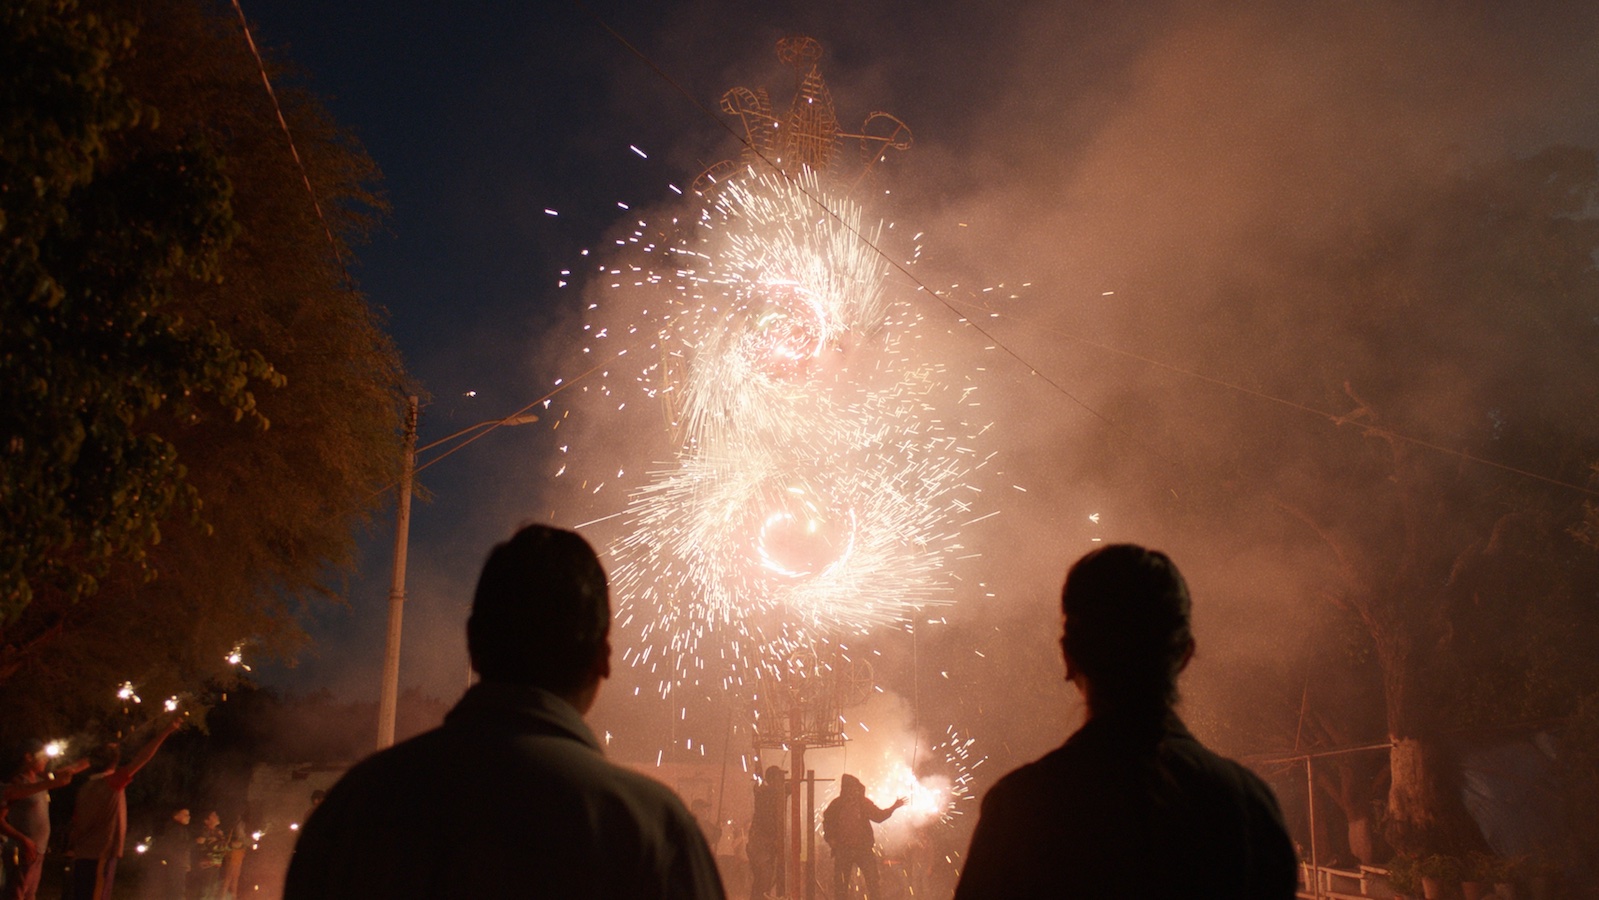 Two people silhouetted from behind looking at fireworks